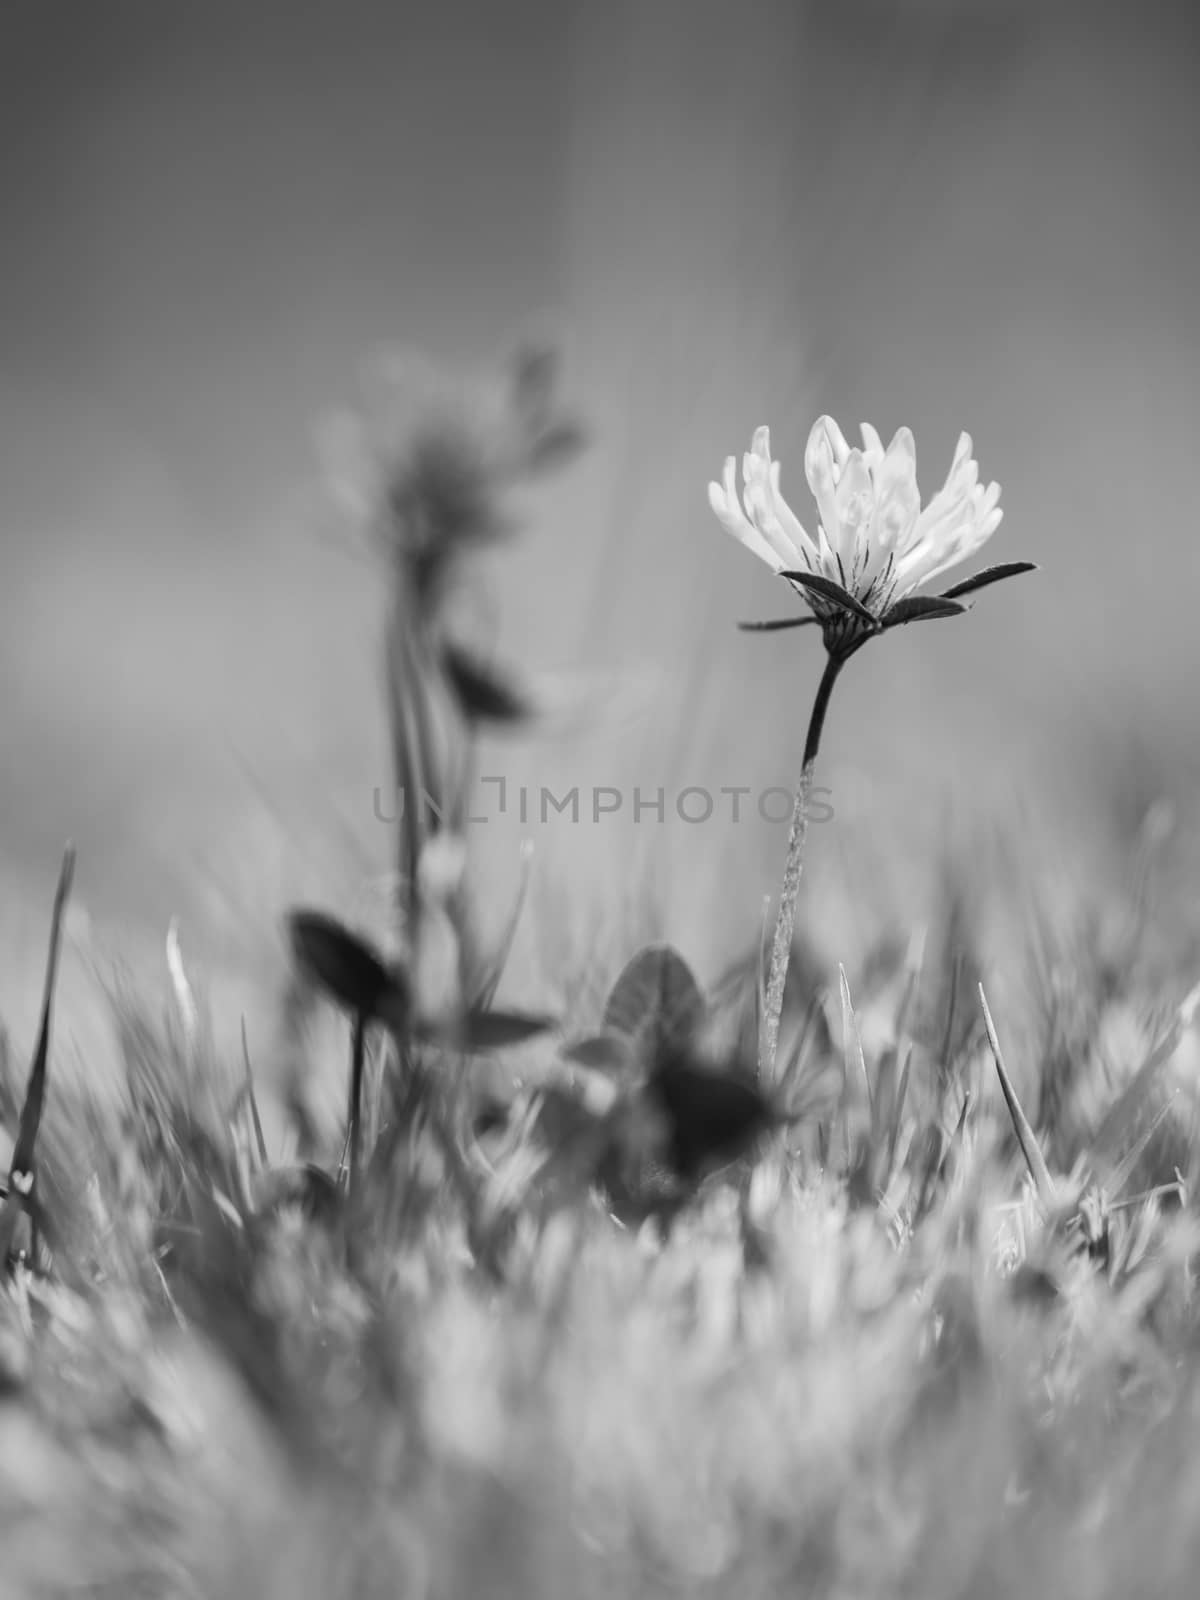 Light  red clover flower surrounded by grass straws. Black and white photo